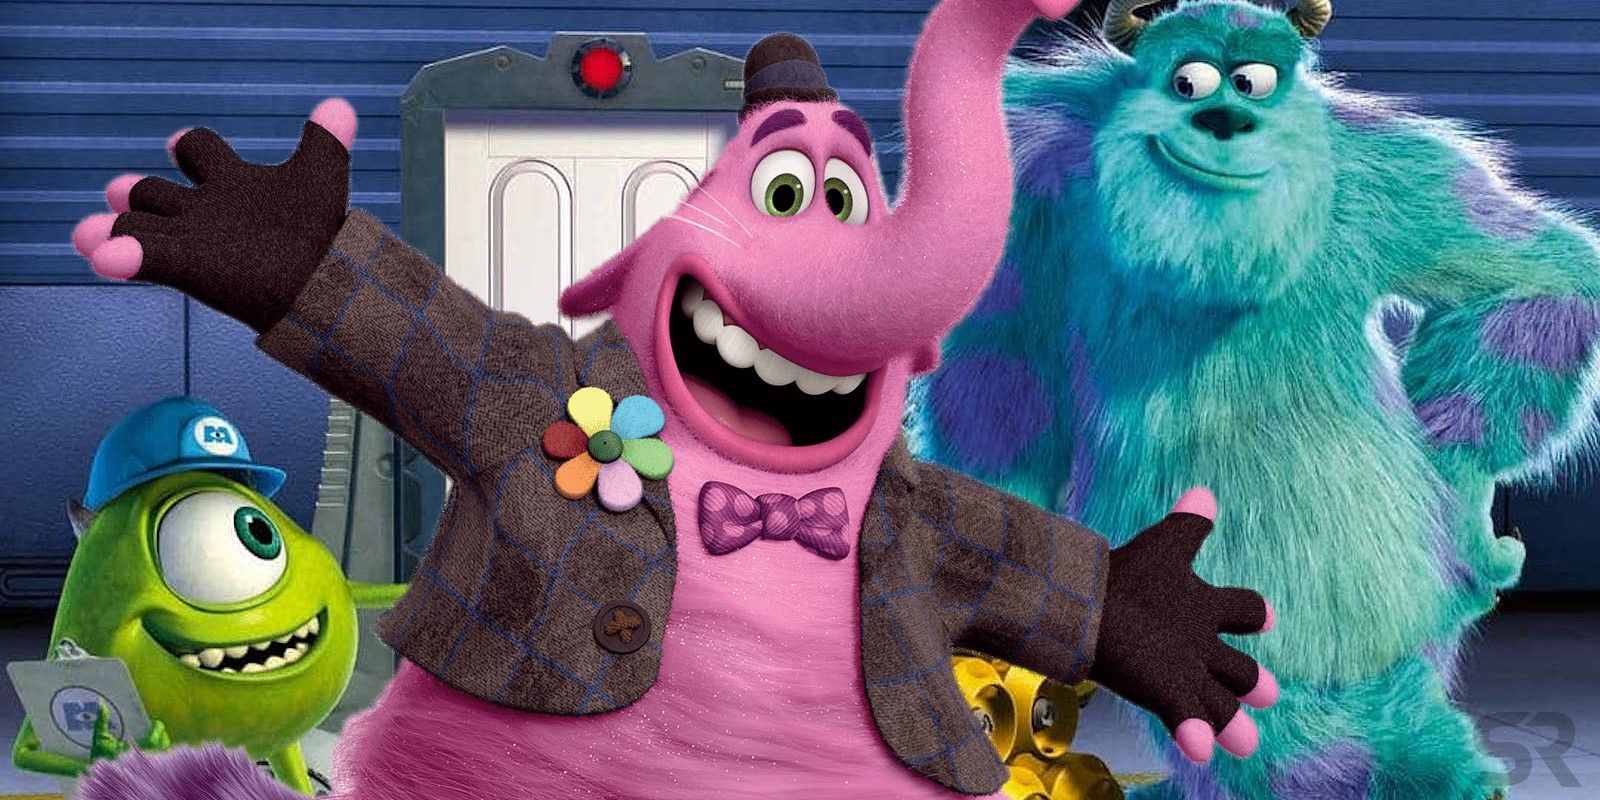 Bing Bong Inside Out Monsters Inc Pixar Theory promo image